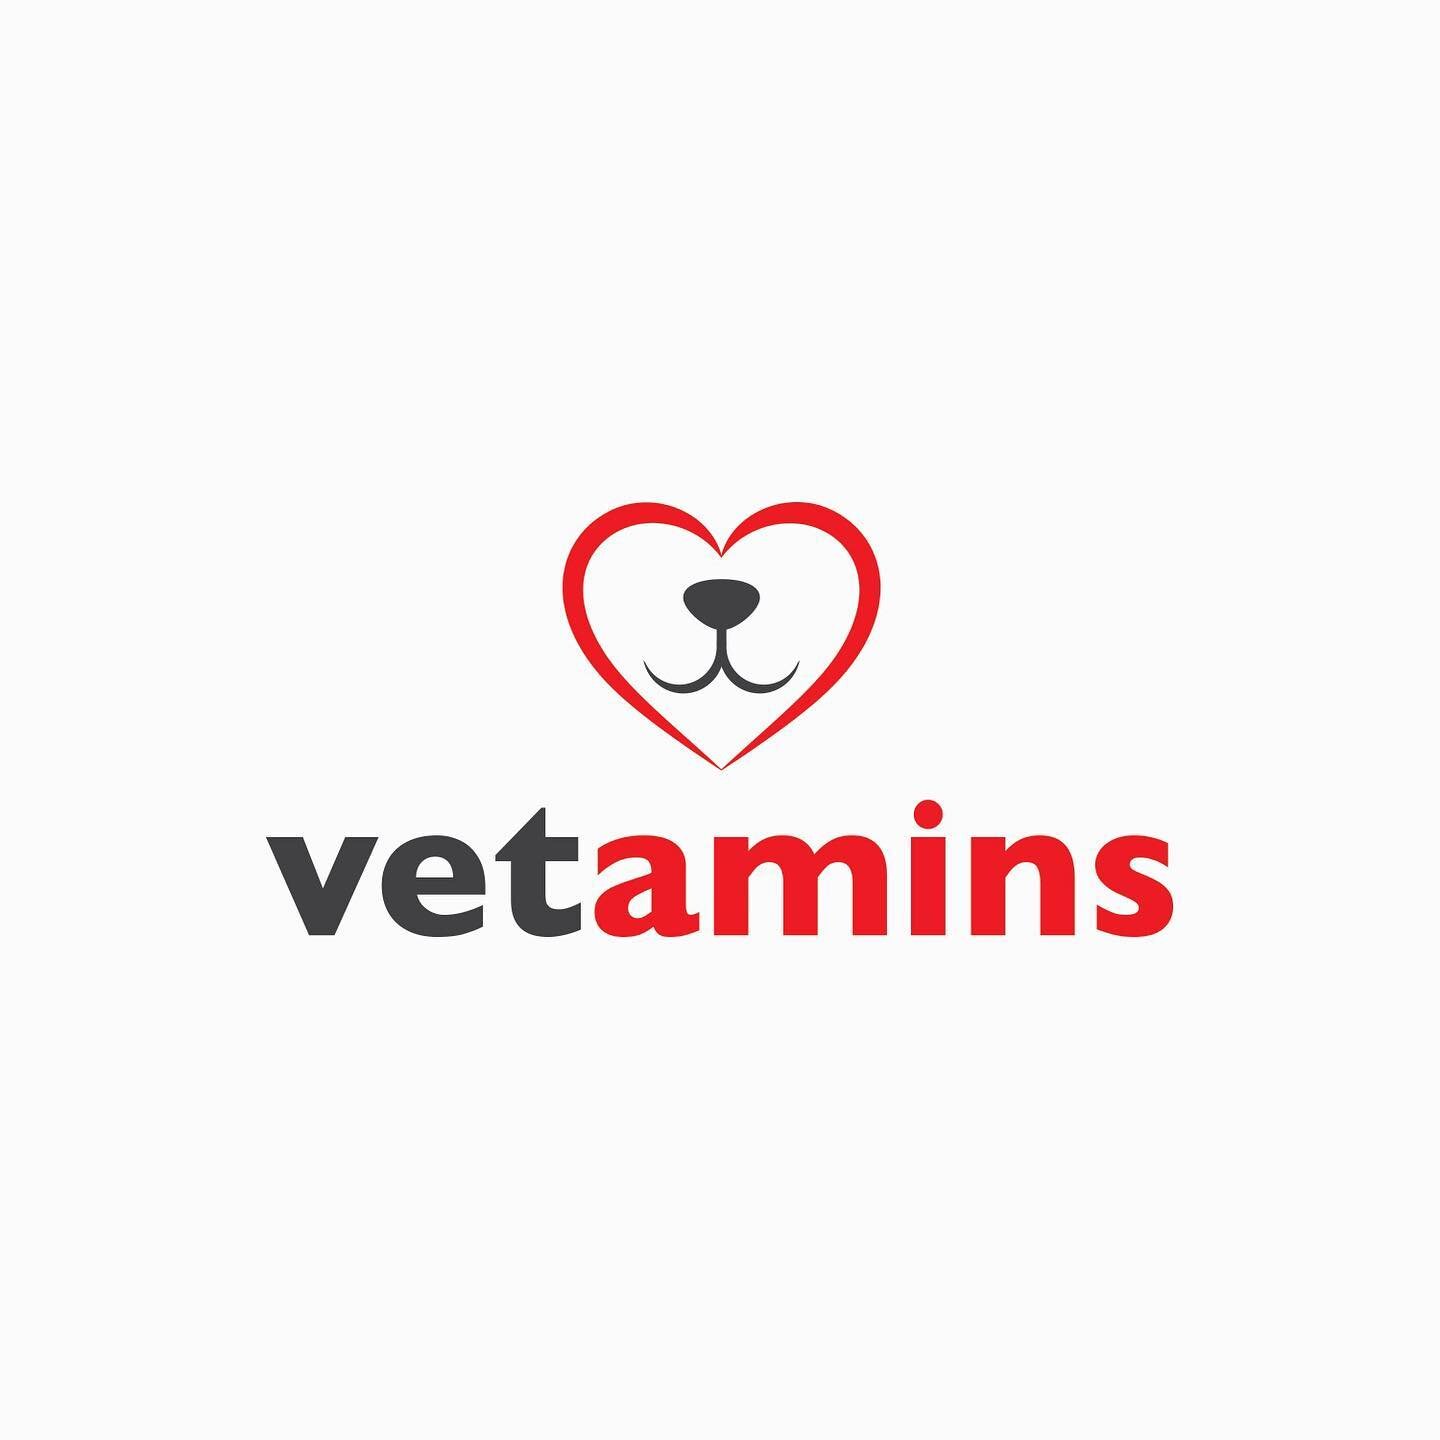 Logo &amp; Packaging for Vetamins. Pet products made by veterinarians so you know they&rsquo;re good for your fur babies.